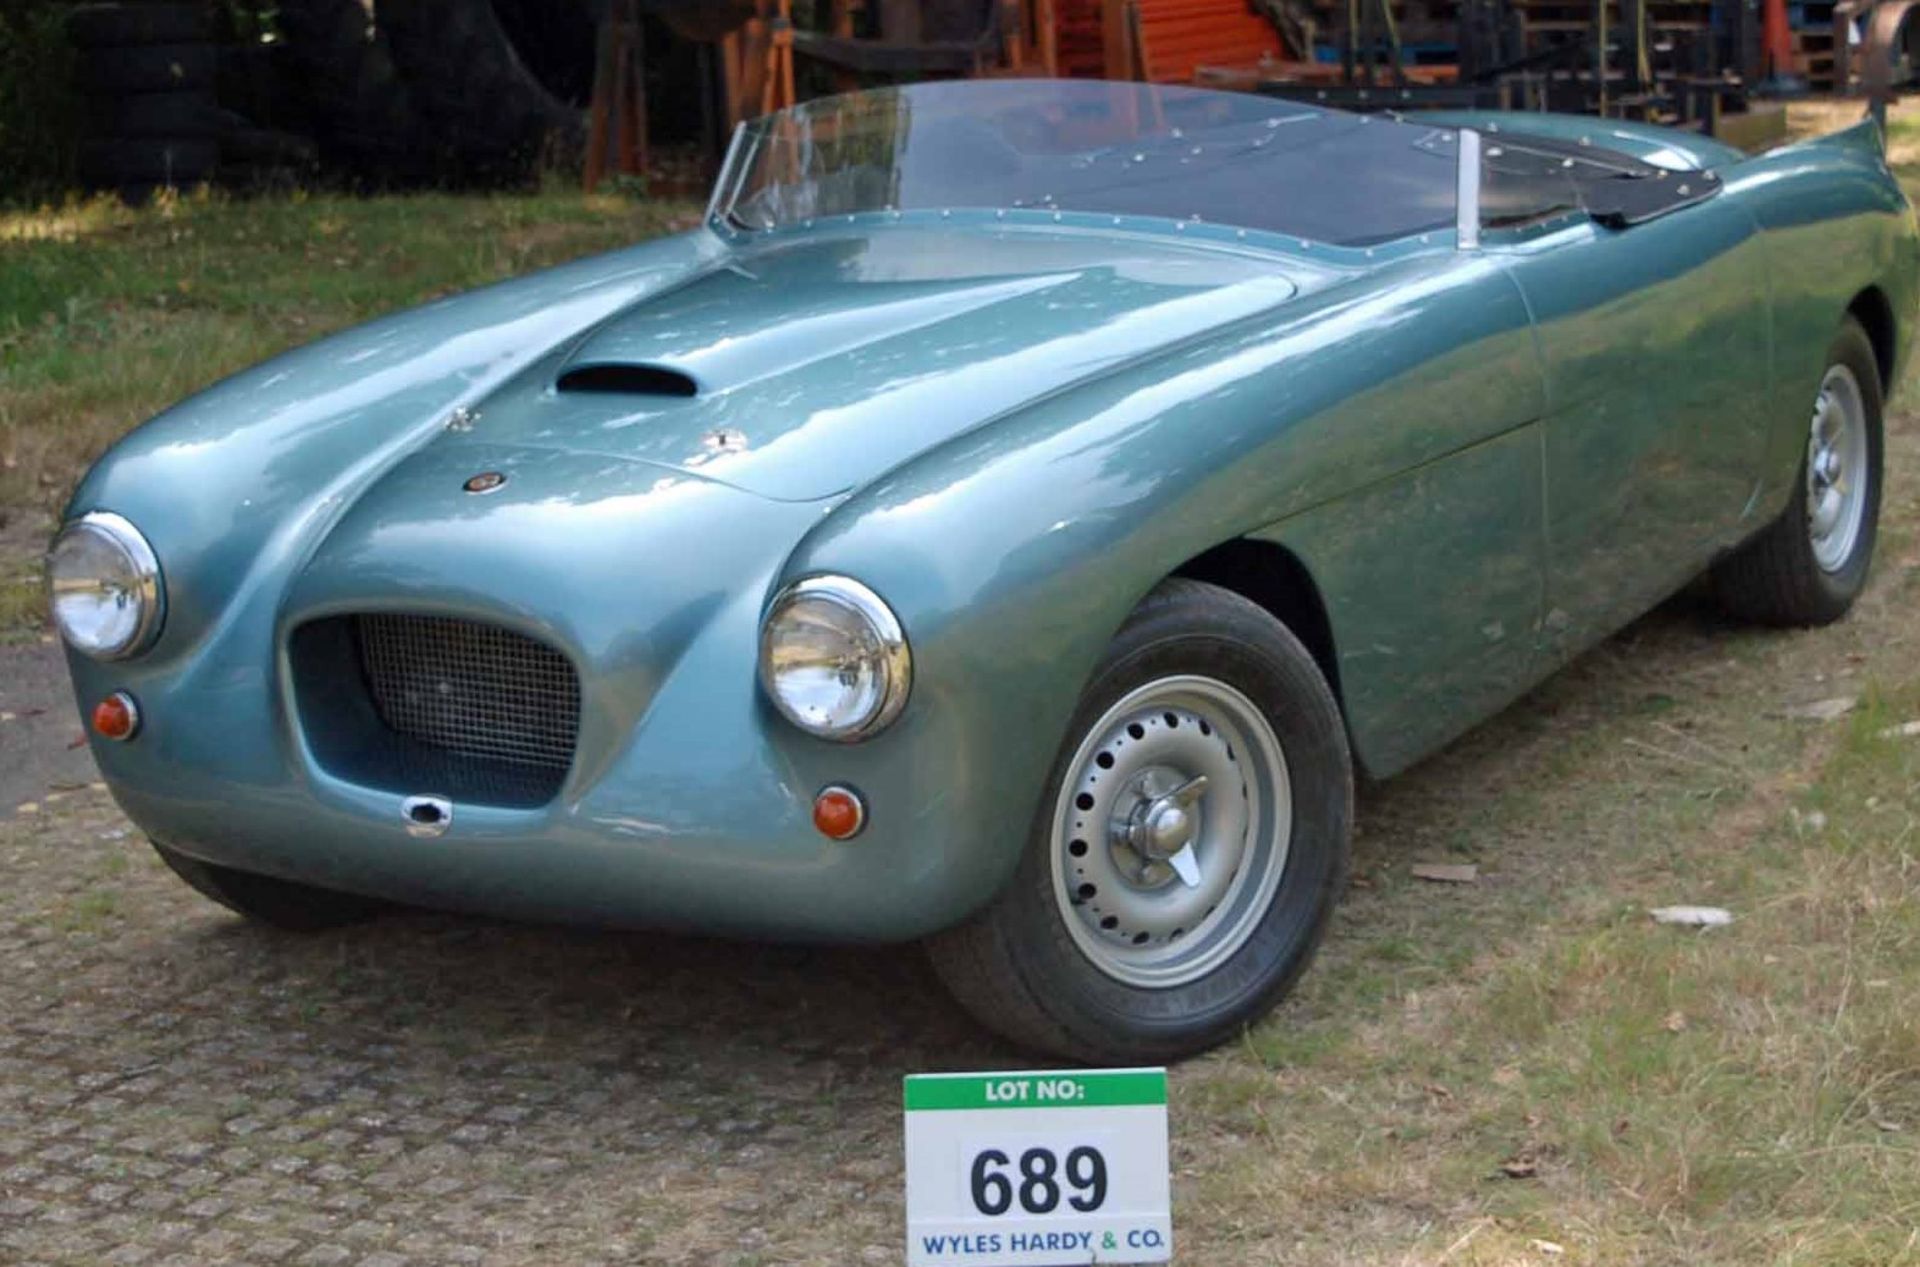 The 1964 Bristol 409 Bullet Speedster. The original Bullet, this car started life as a Bristol 409 - Image 2 of 17